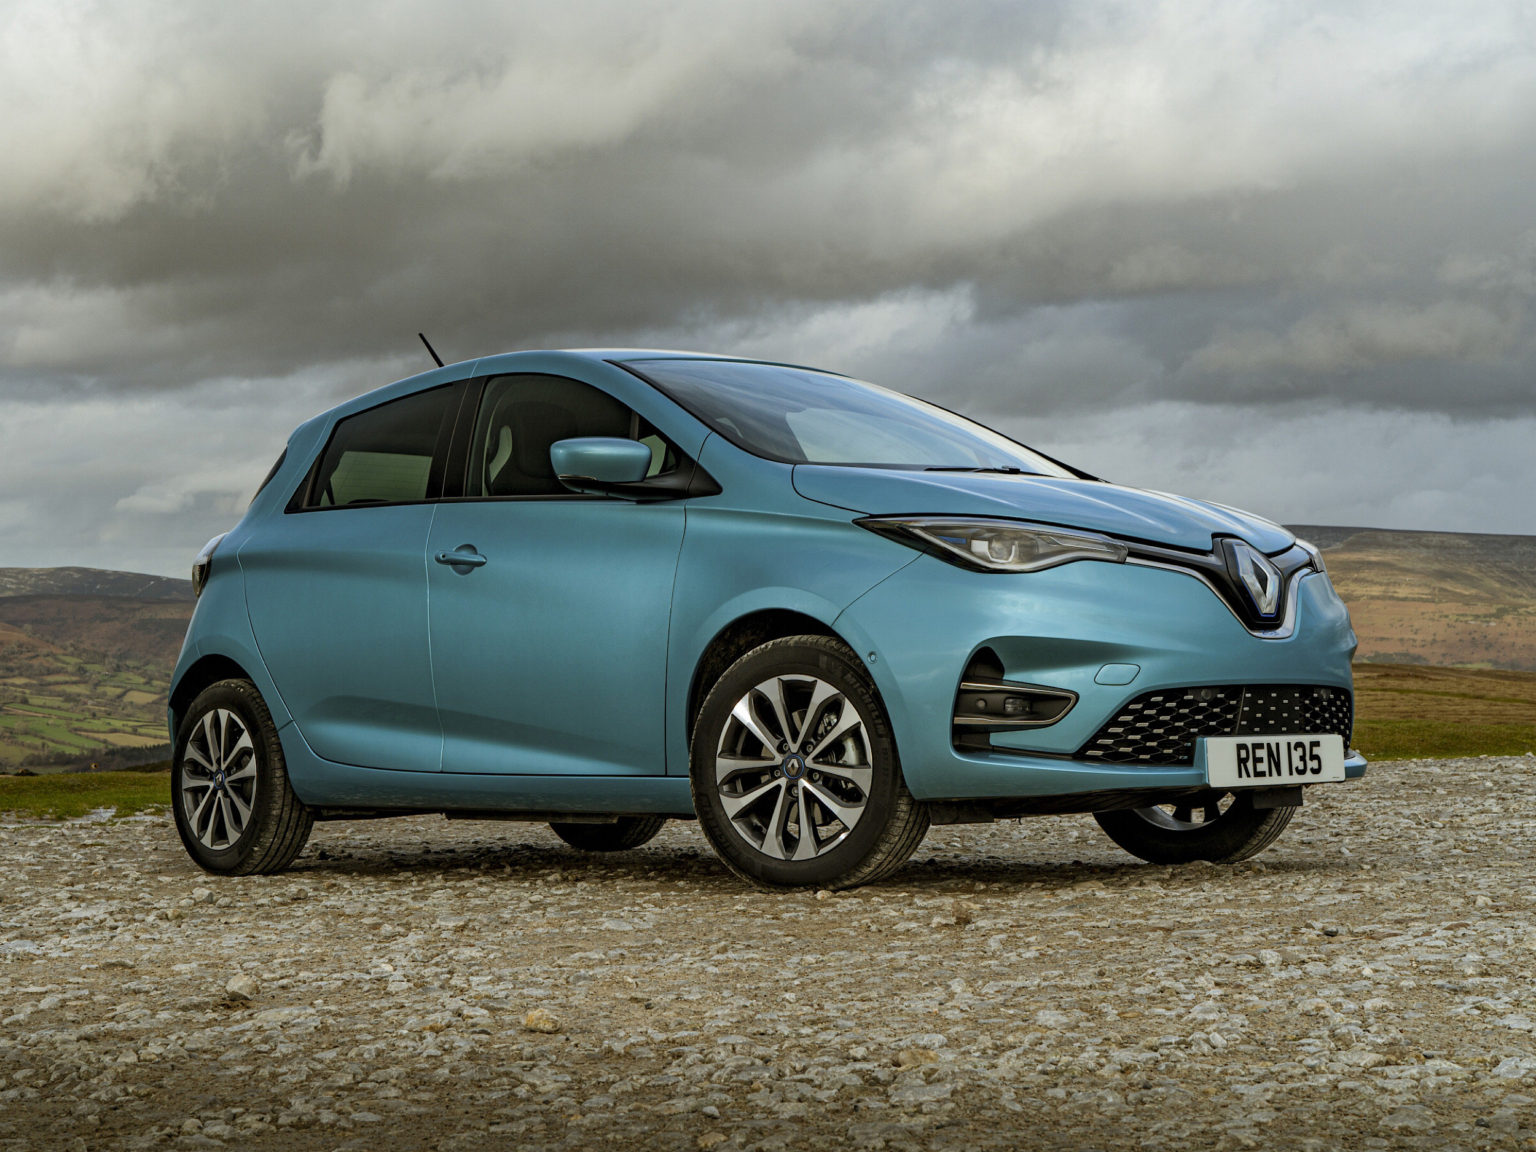 The Renault Zoe has gotten more range for the 2020 model year